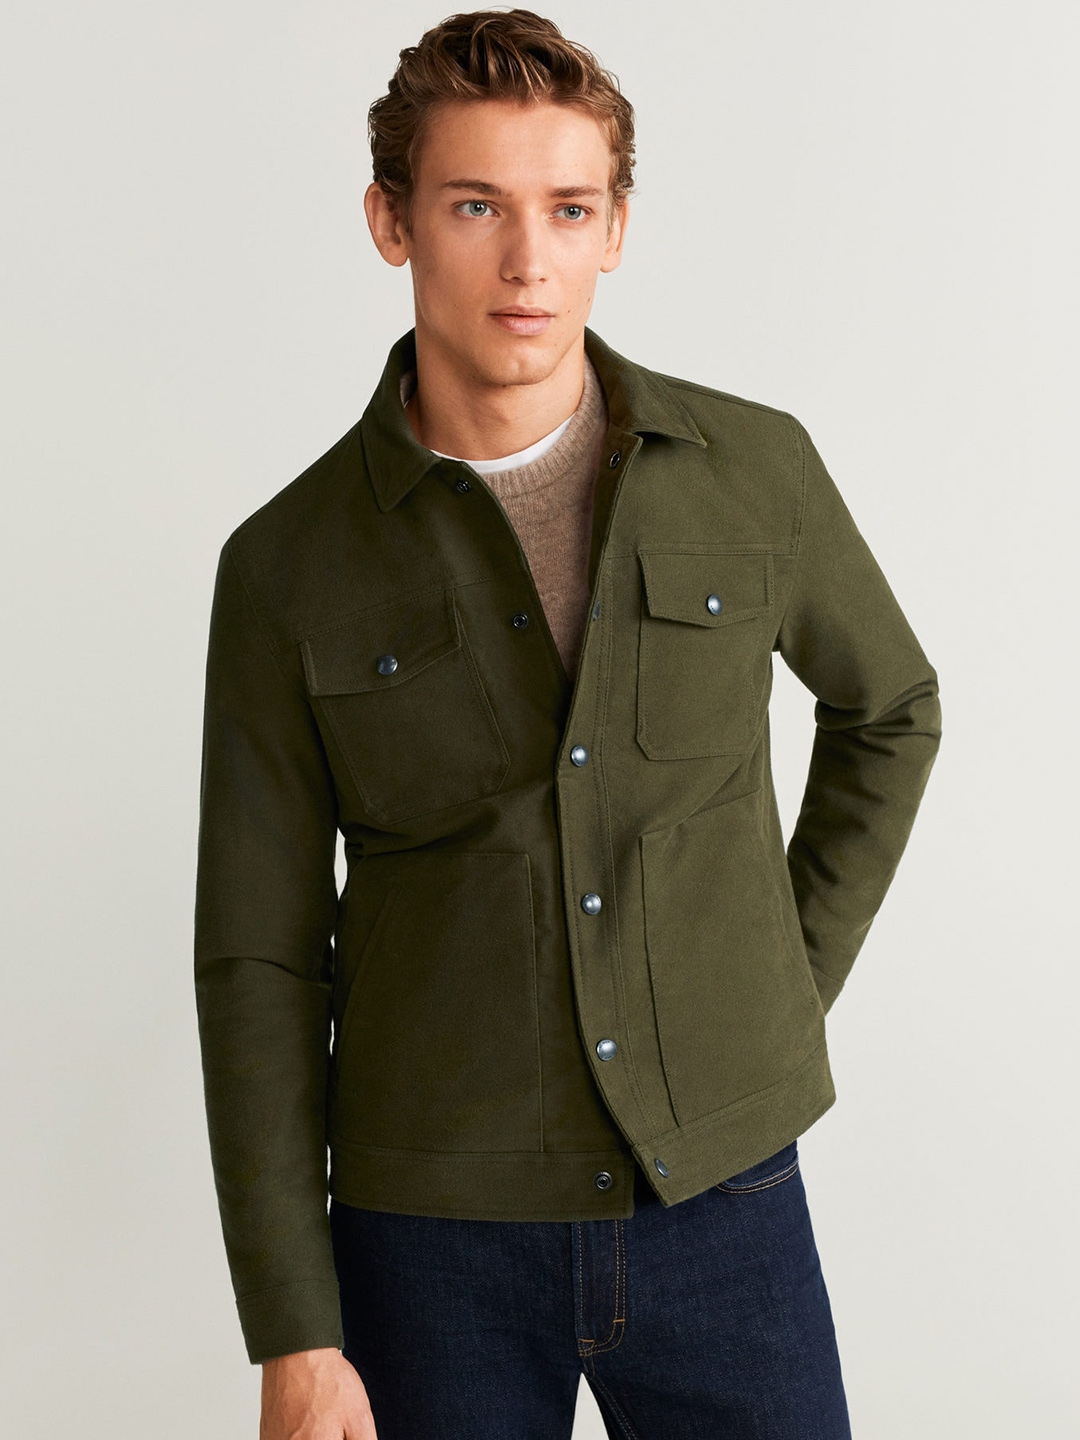 Buy MANGO MAN Olive Green Solid Tailored Jacket - Jackets for Men ...